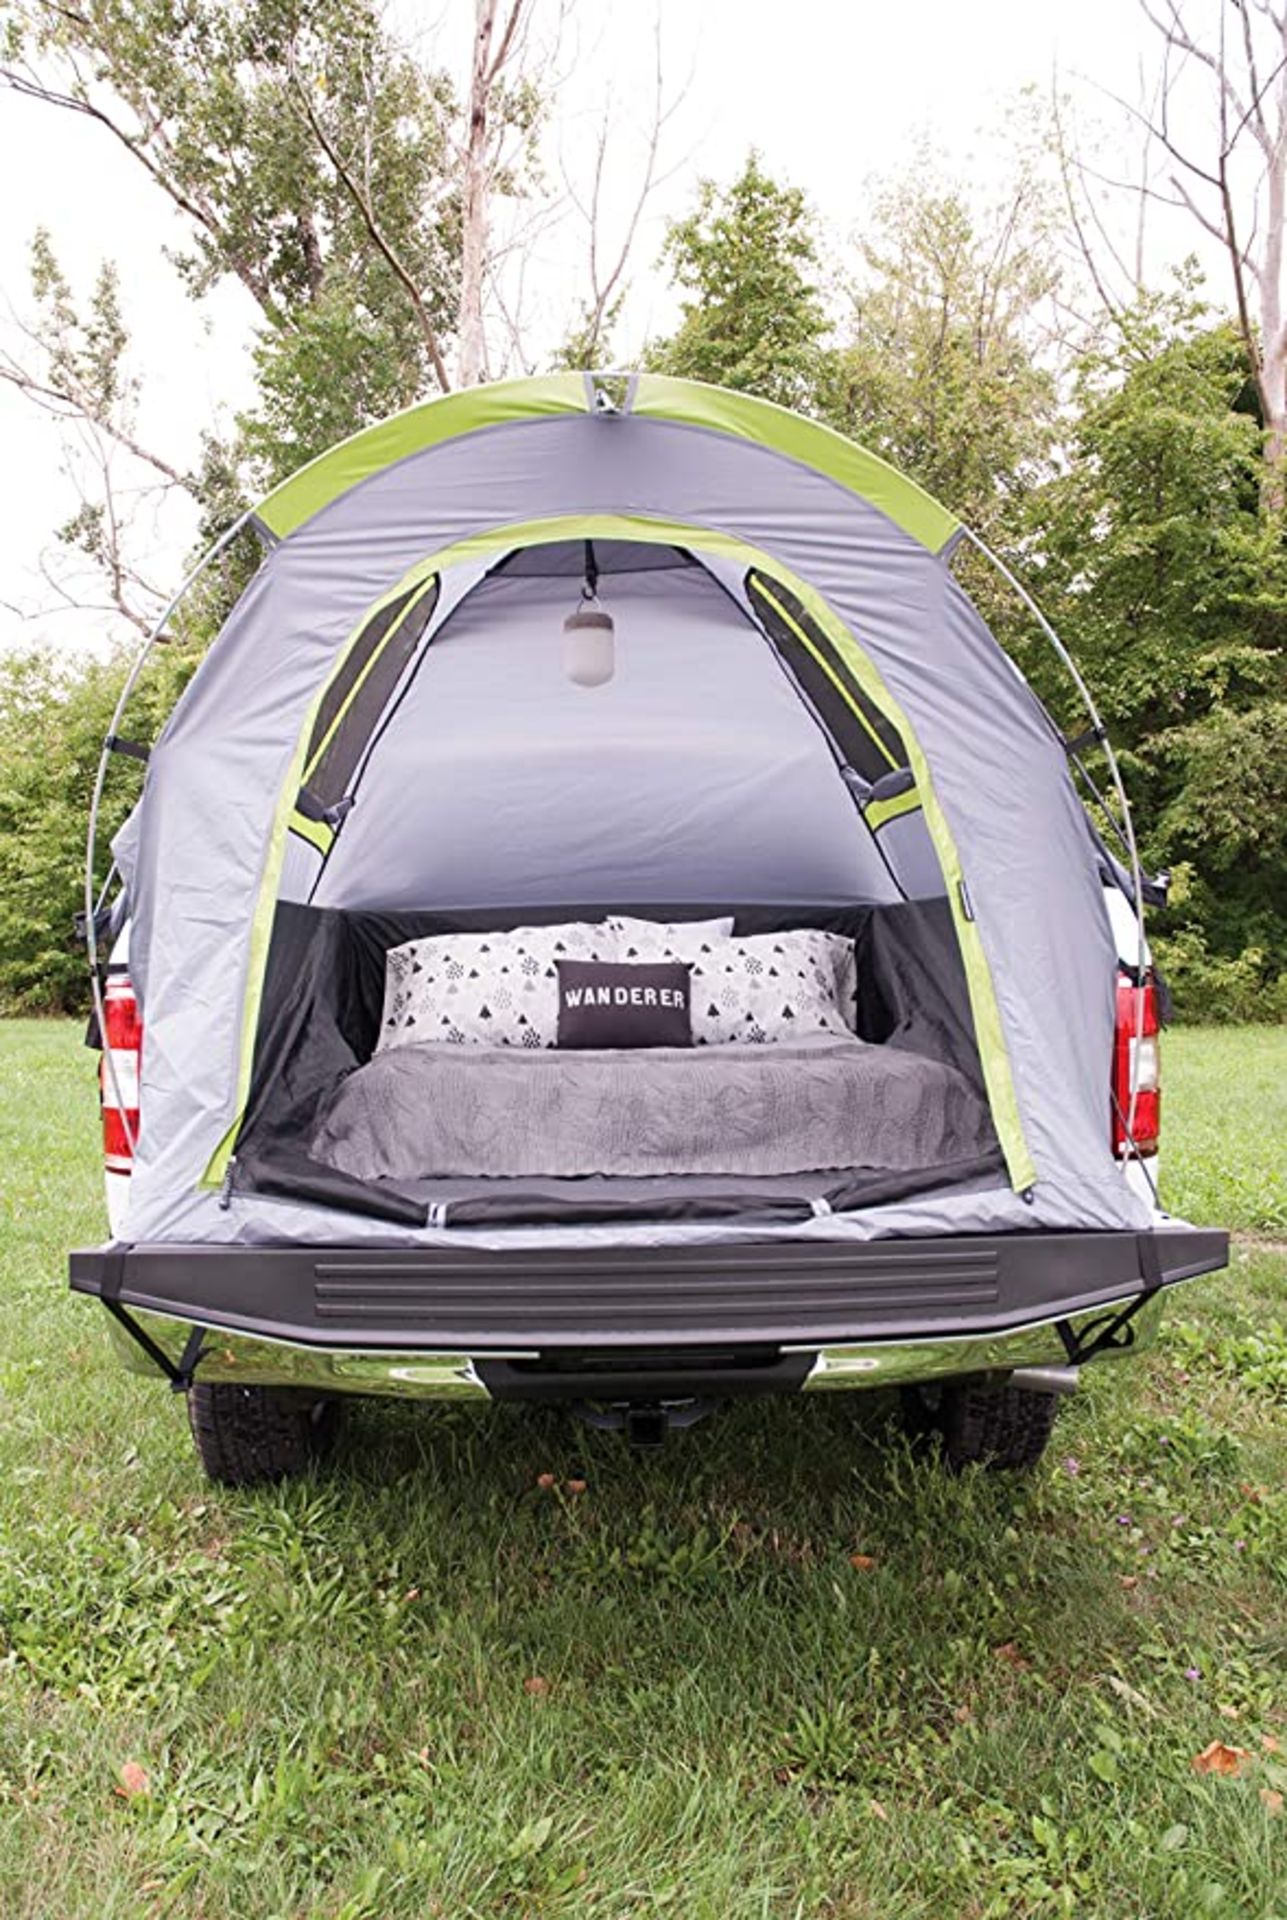 UNITS - RBSM SMALL TRUCK CAMPING TENT W/ RAINFLY (NEW) (MSRP $280) - Image 2 of 6